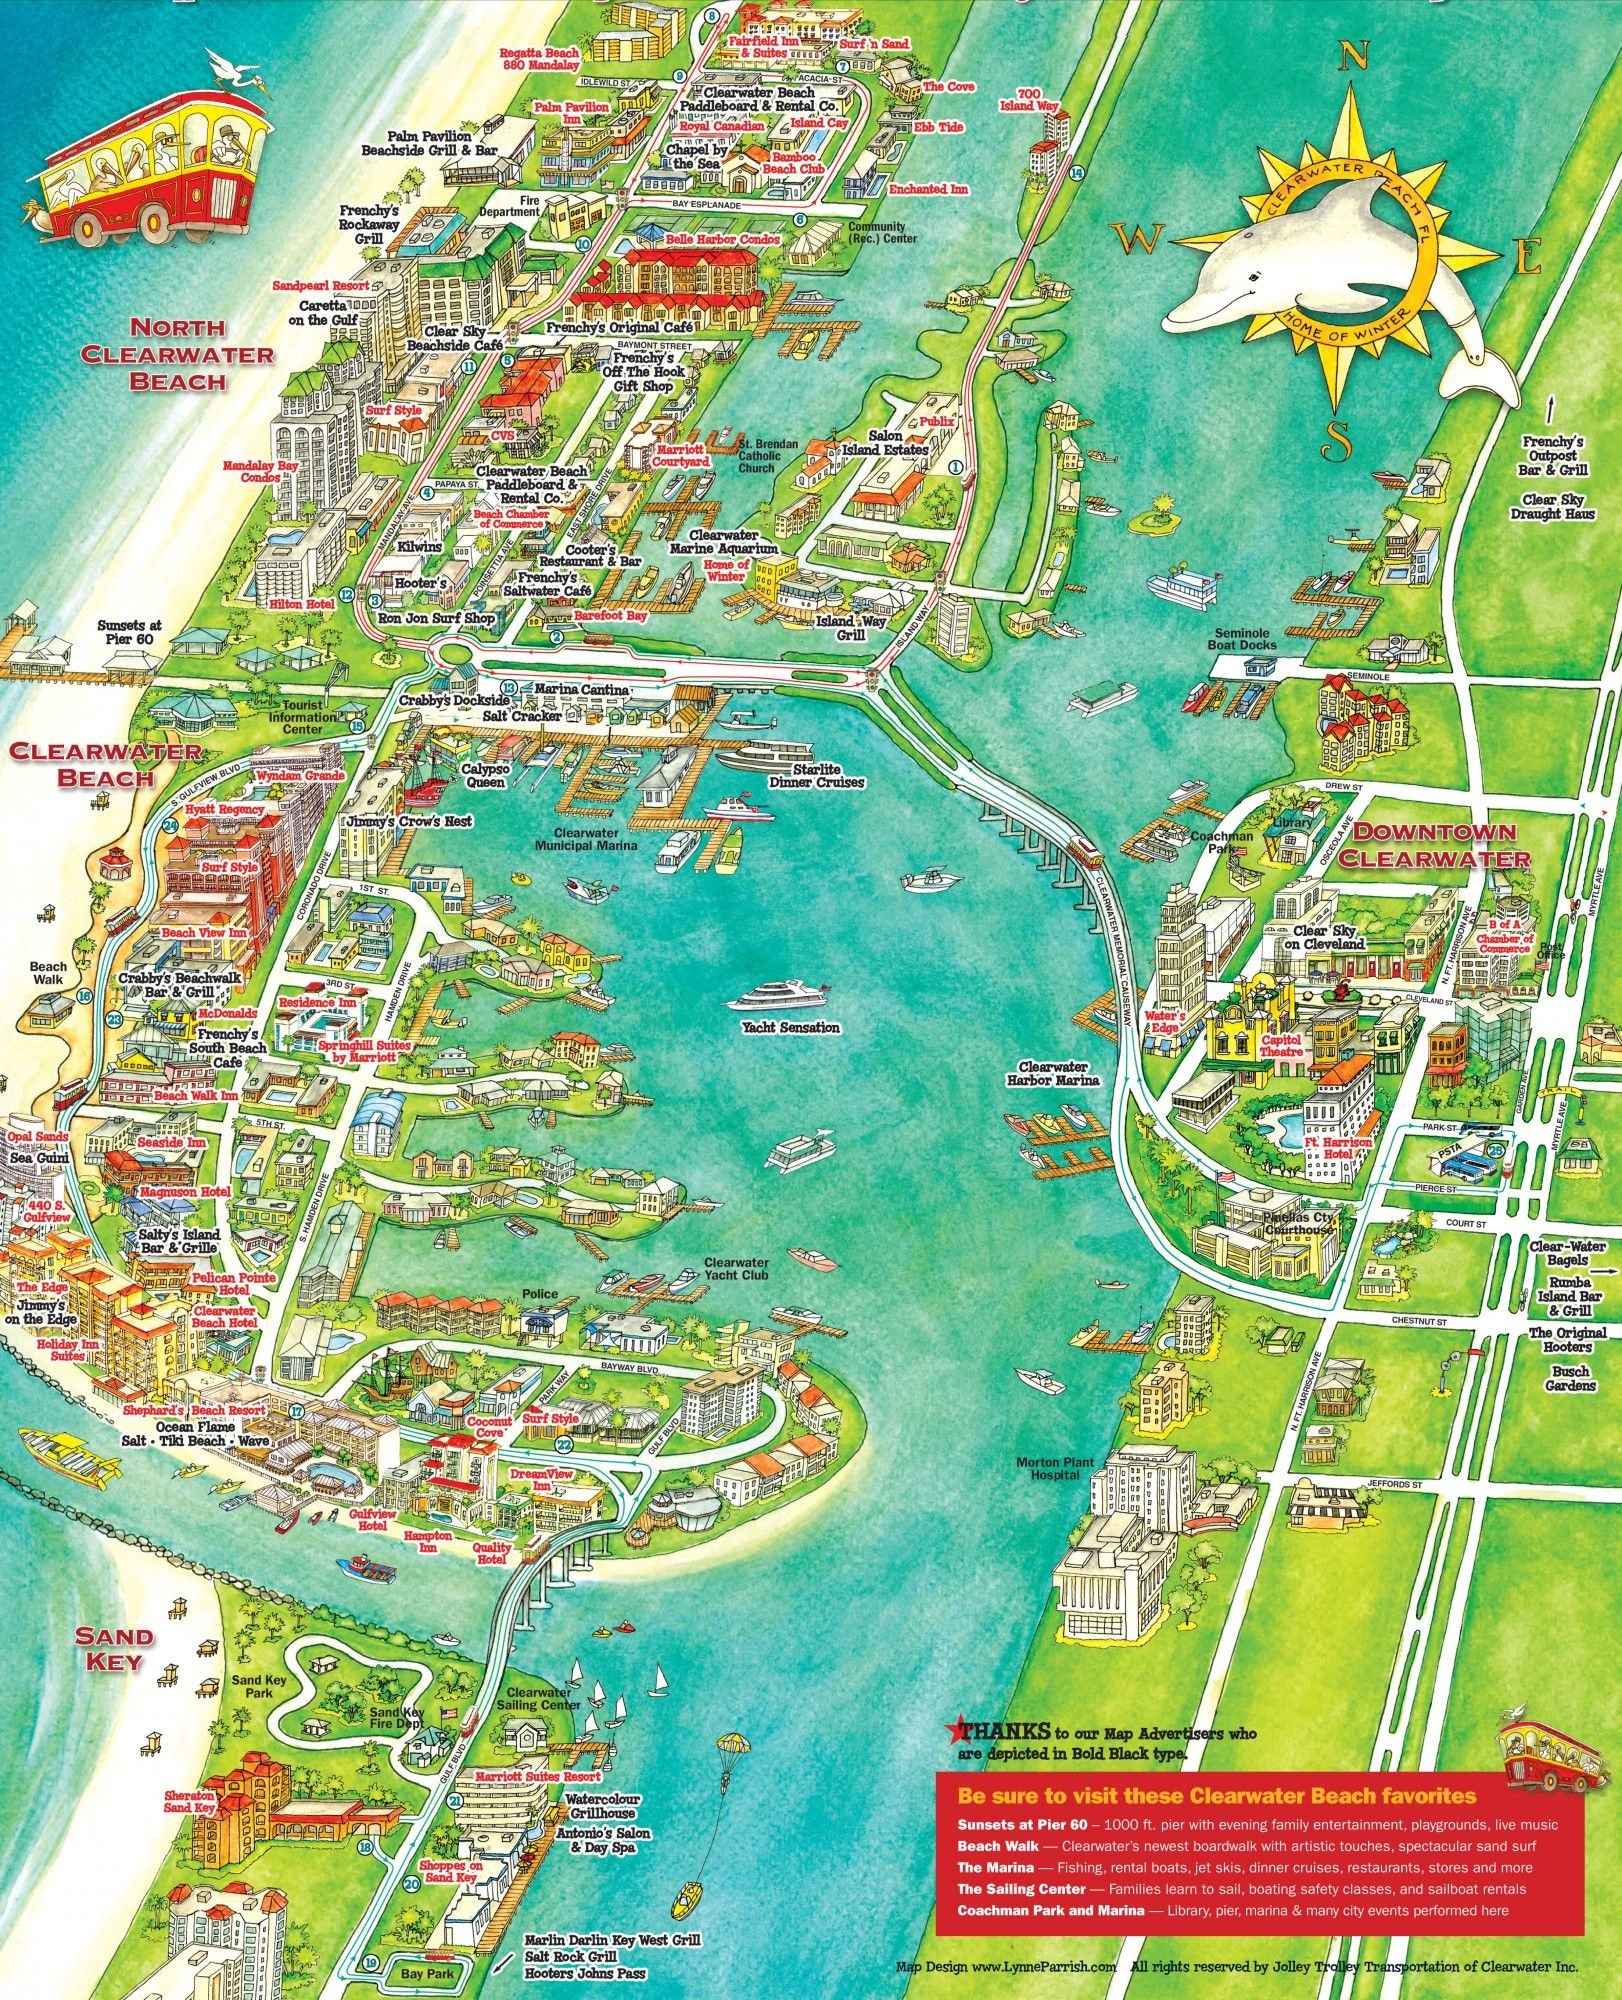 What To Do In Clearwater, Florida - Clearwater Beach Florida Map Of Hotels